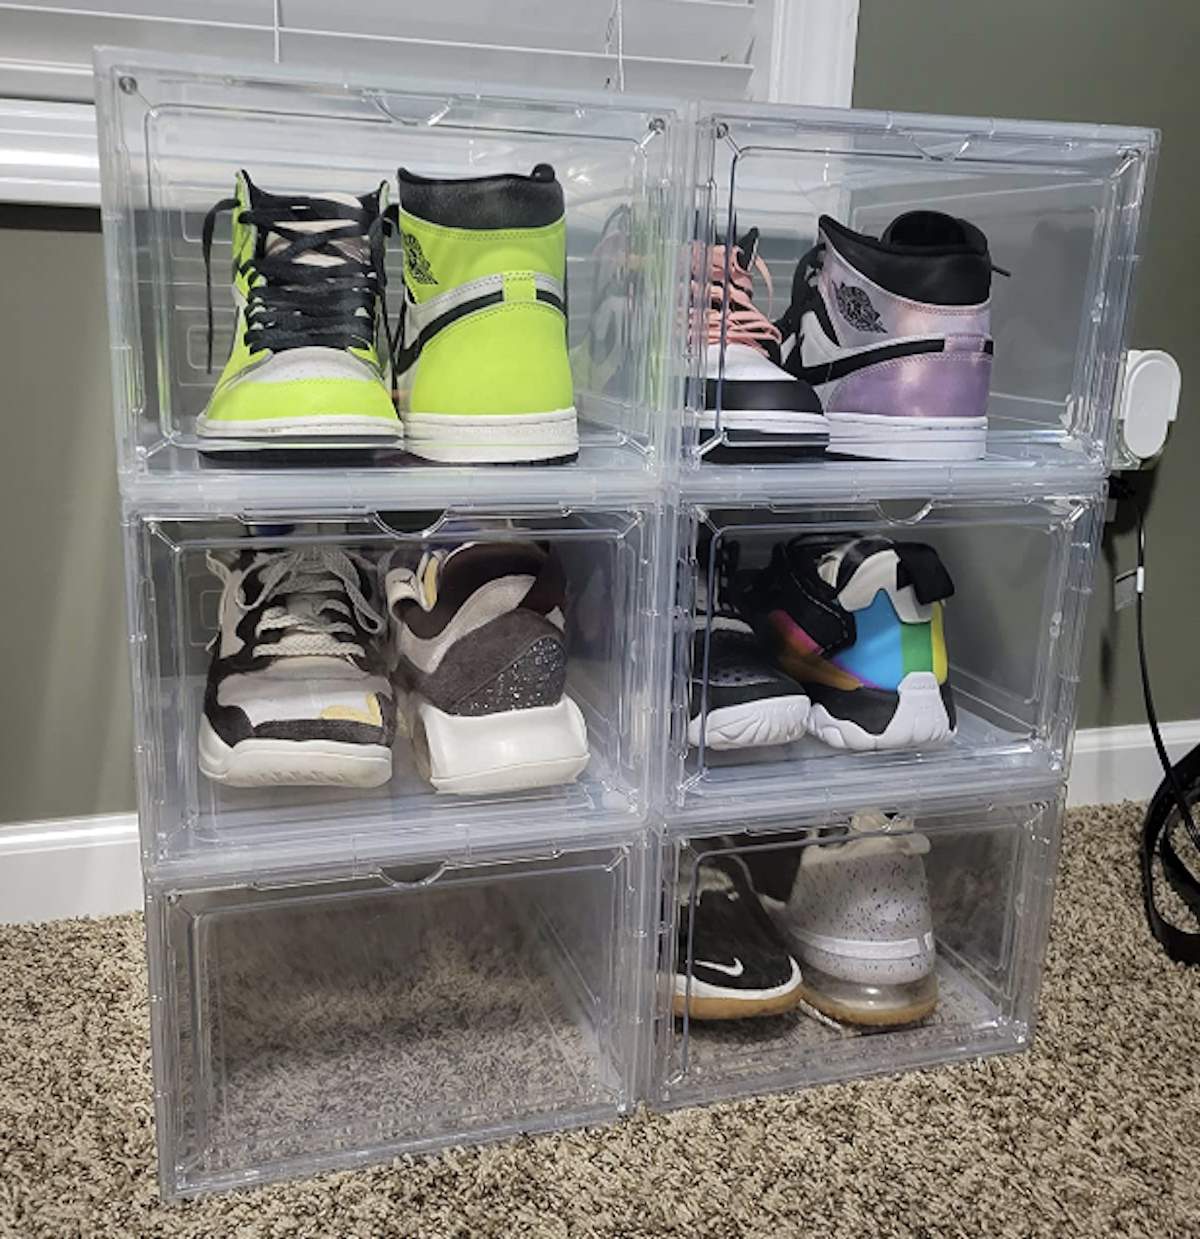 clear bins on carpet floor with various styles of nikes sneakers inside